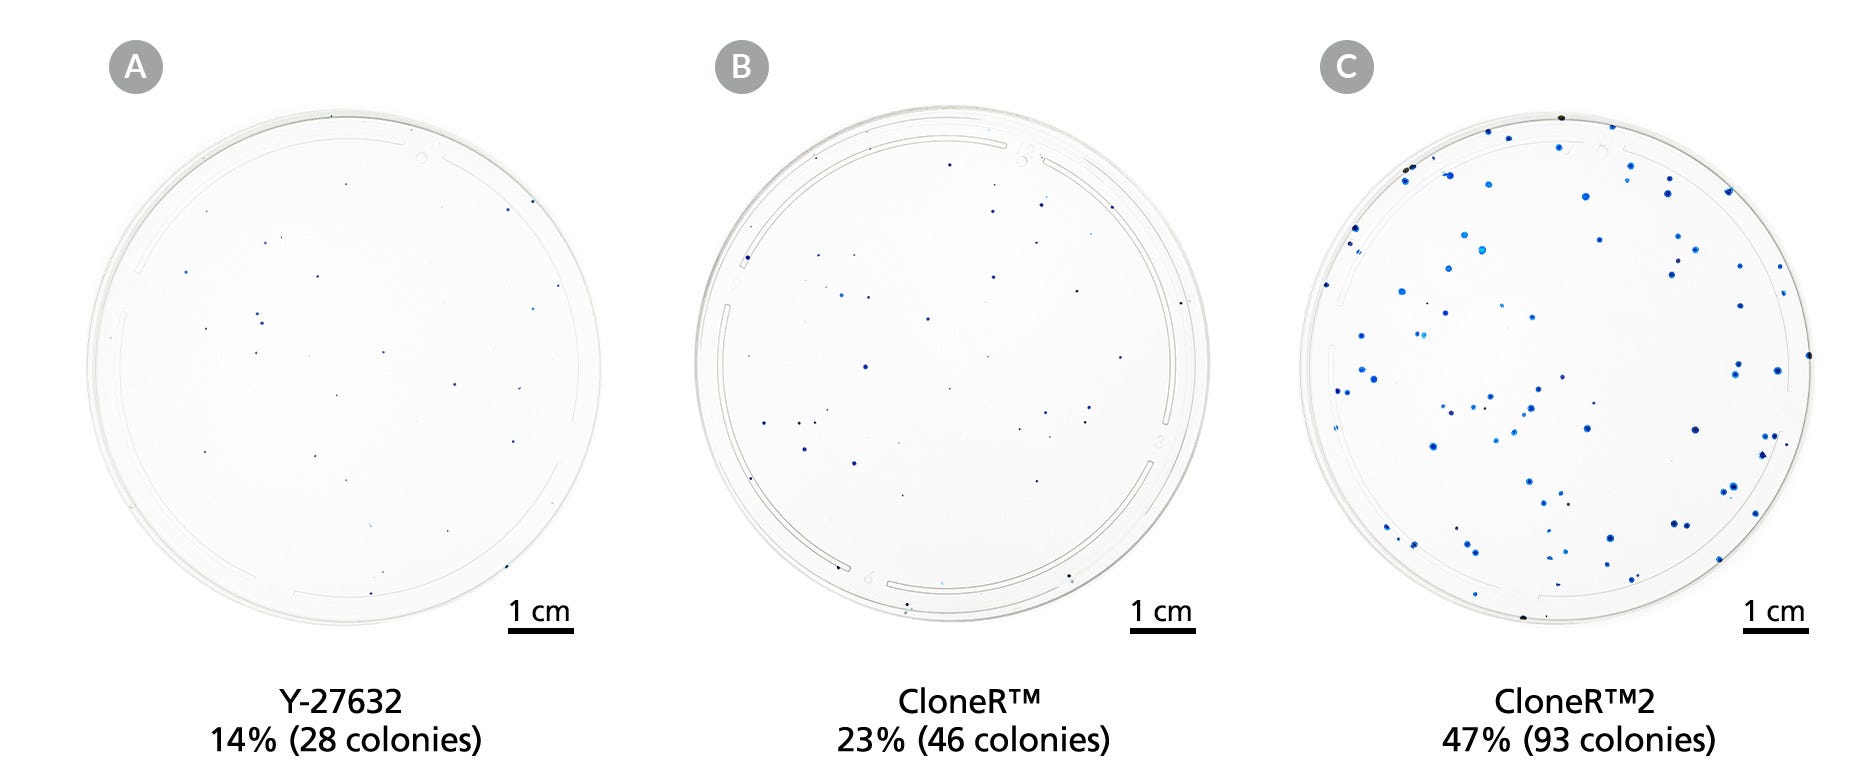 Three 10 cm dishes showing increased numbers of colonies from Y-27632 compound to CloneR™ to CloneR™2